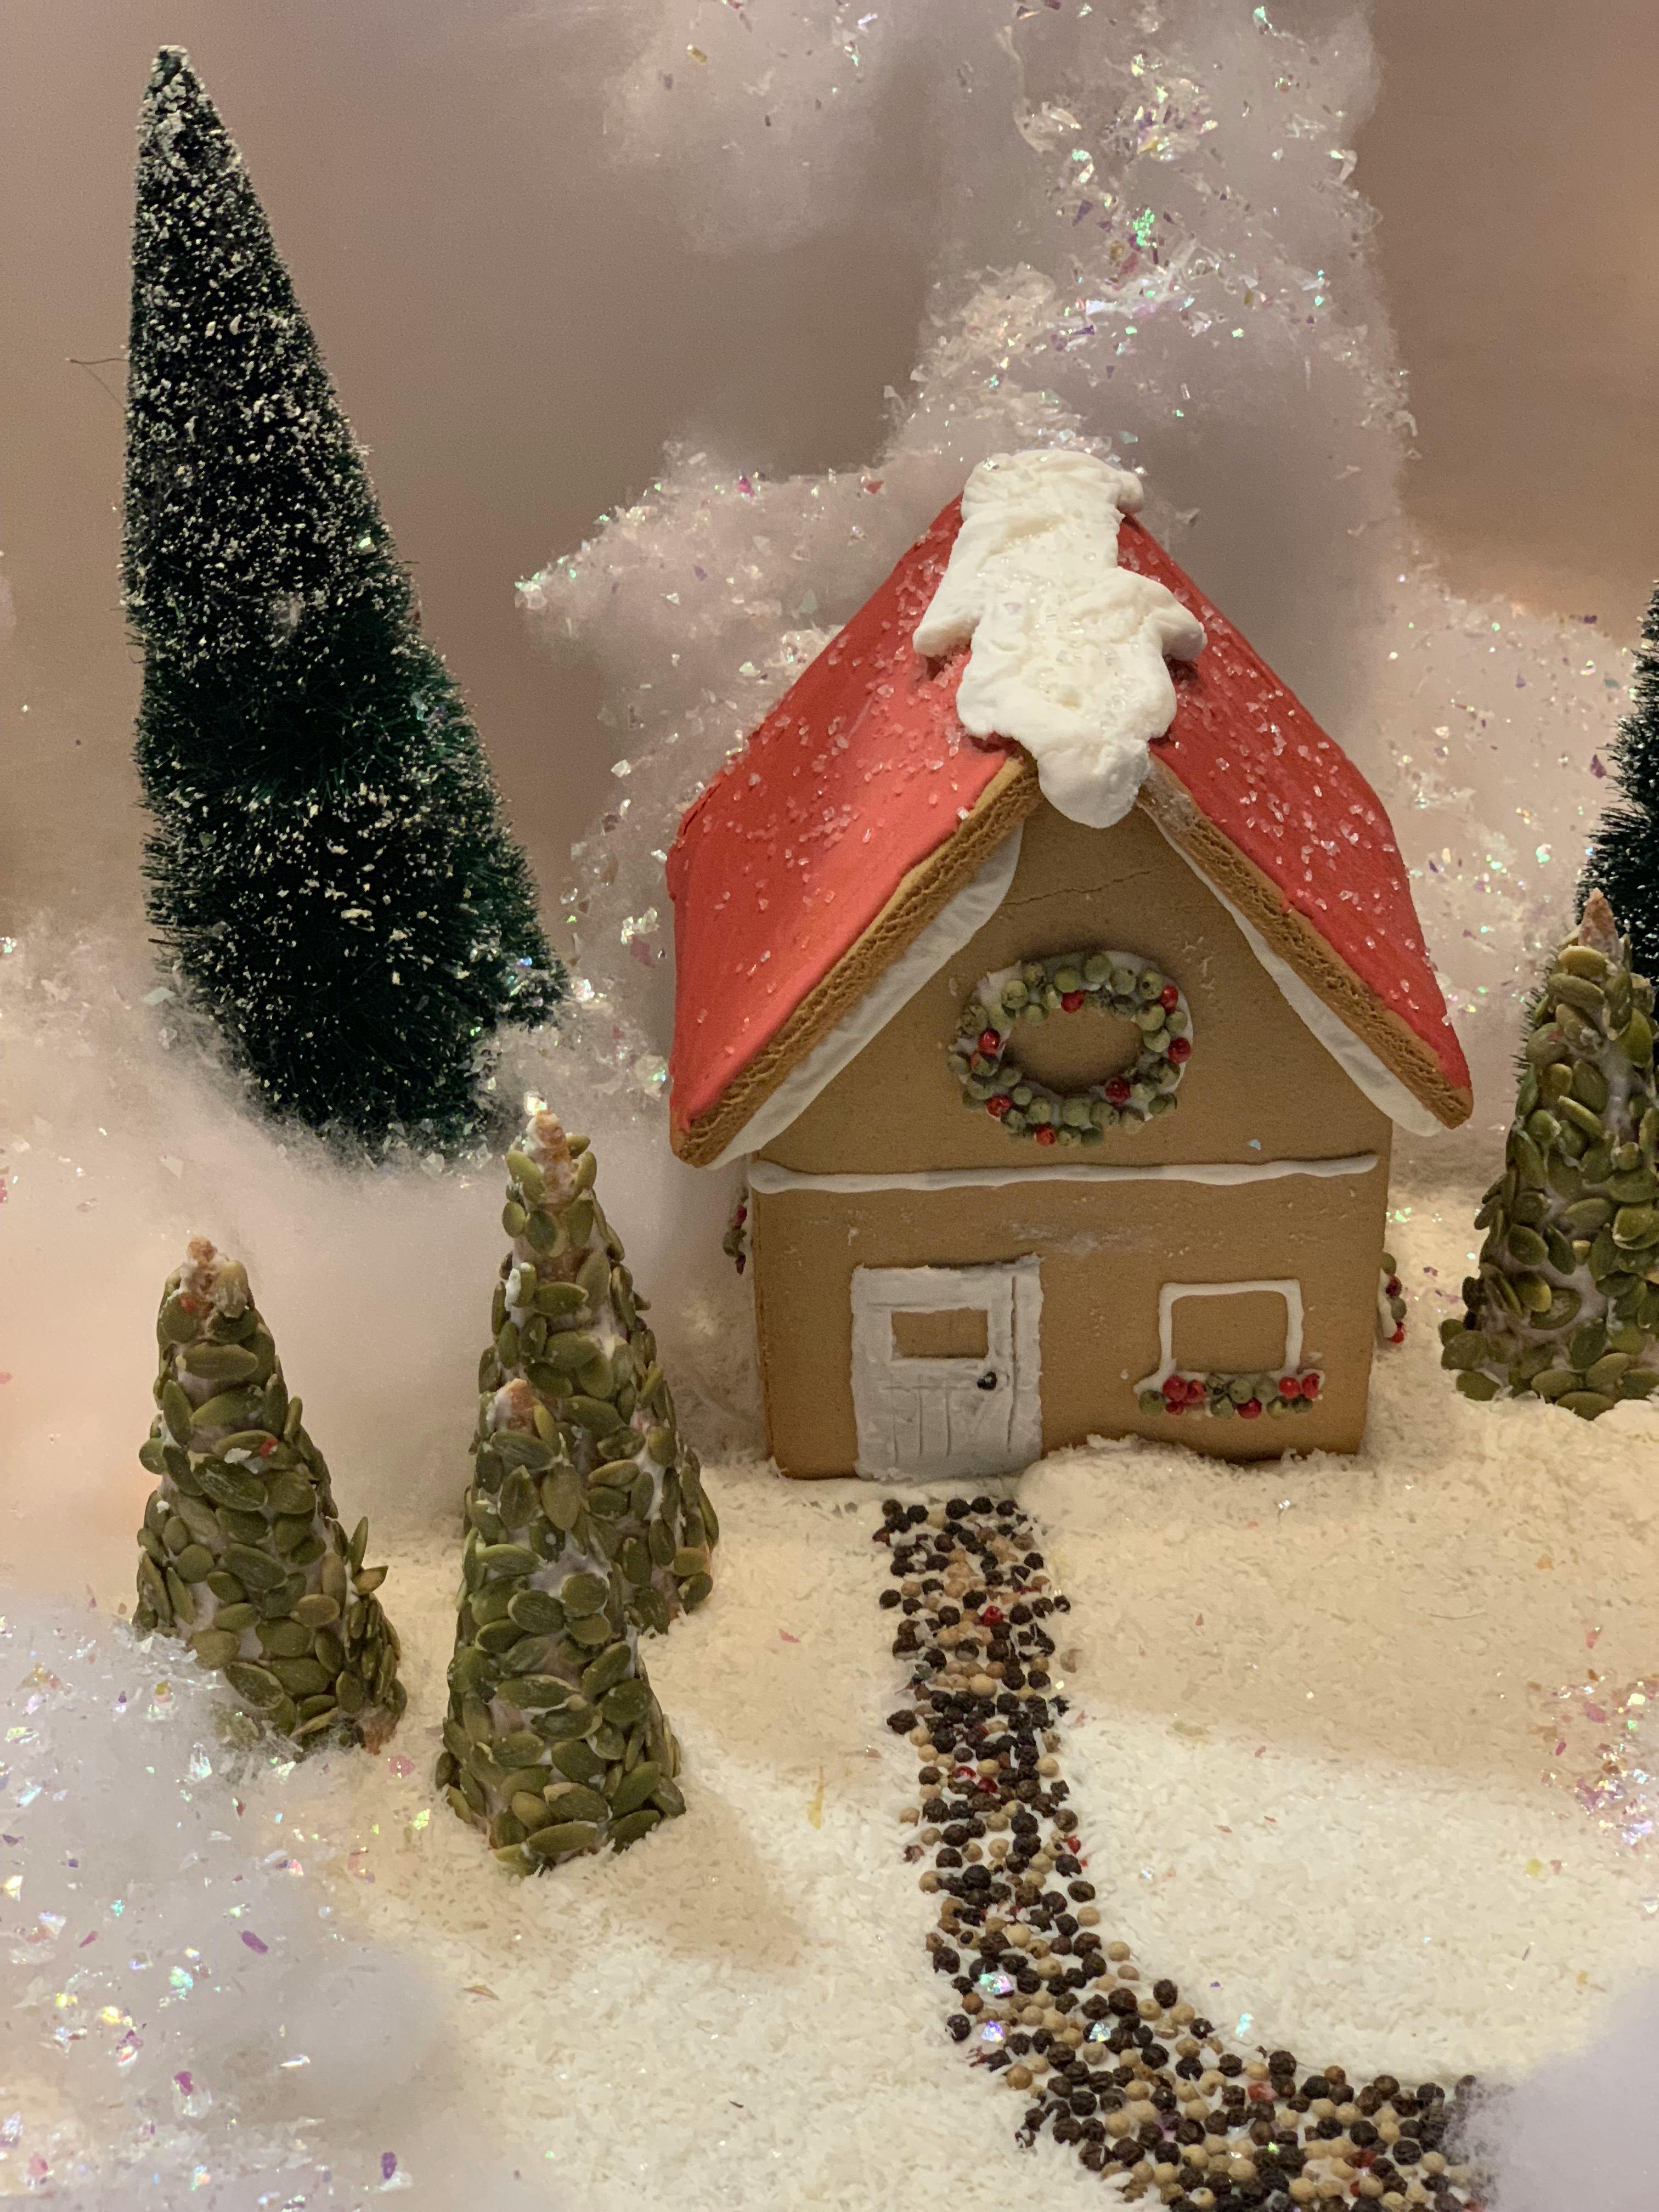 Free stock photo of christmas, gingerbread, gingerbread house